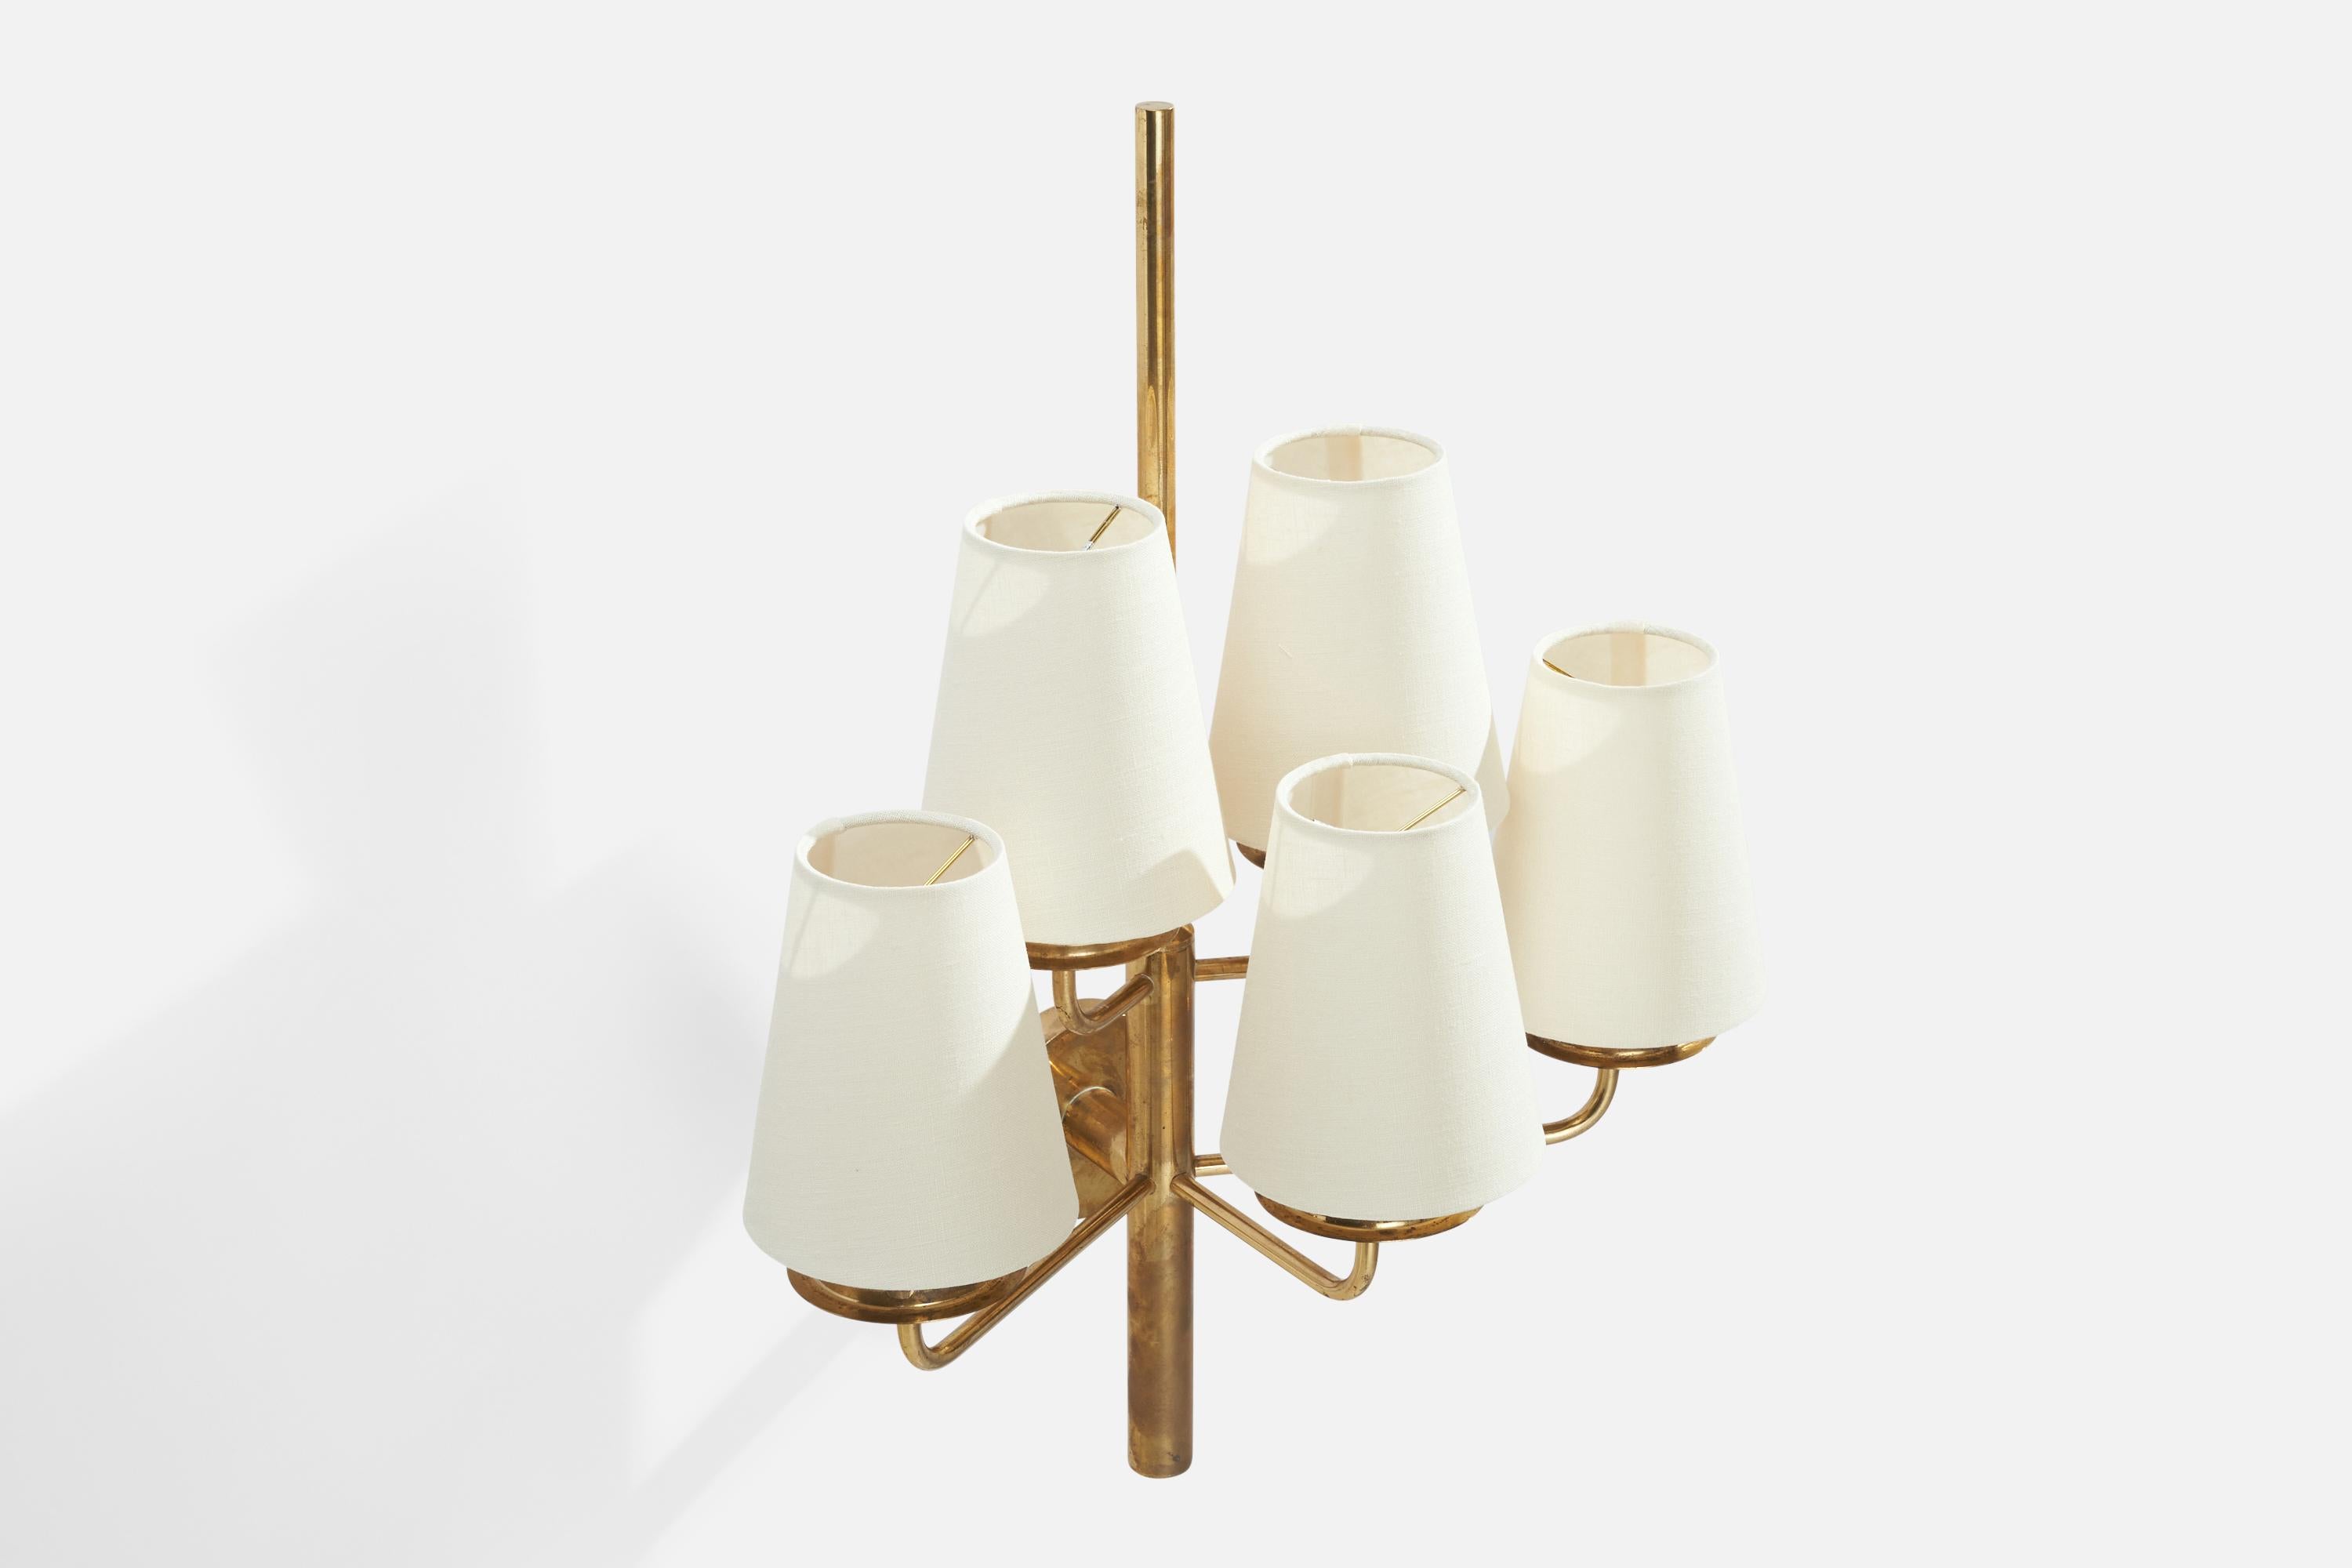 Hans-Agne Jakobsson, Sizeable Wall Lights, Brass, Fabric, Sweden, 1960s For Sale 1